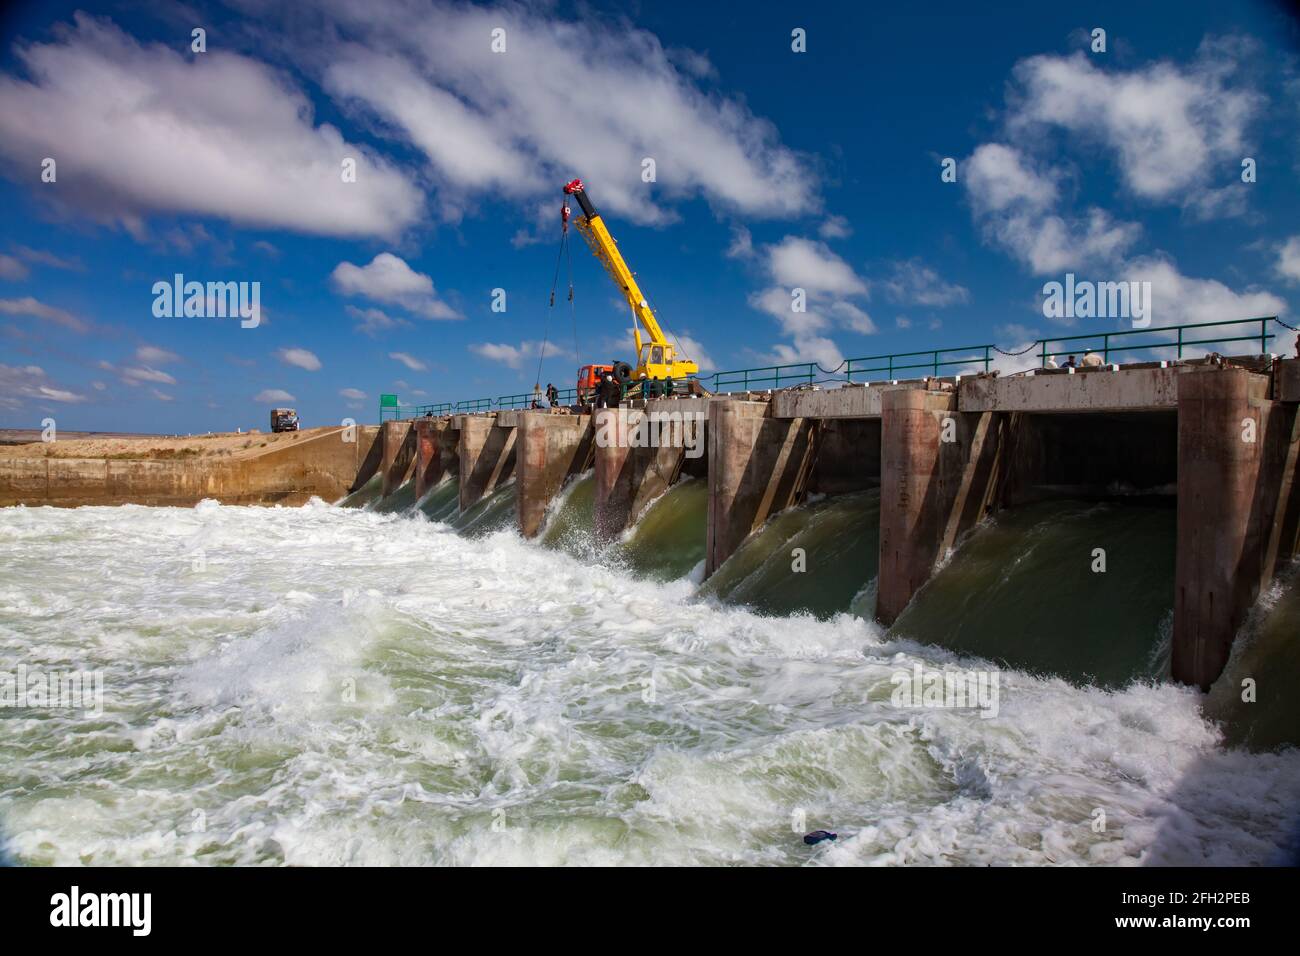 Kok-aral,Kazakhstan: Aral Sea Kok-aral dam.Water discharge in flood.Open shutters.Yellow mobile crane and workers on dam. Stock Photo